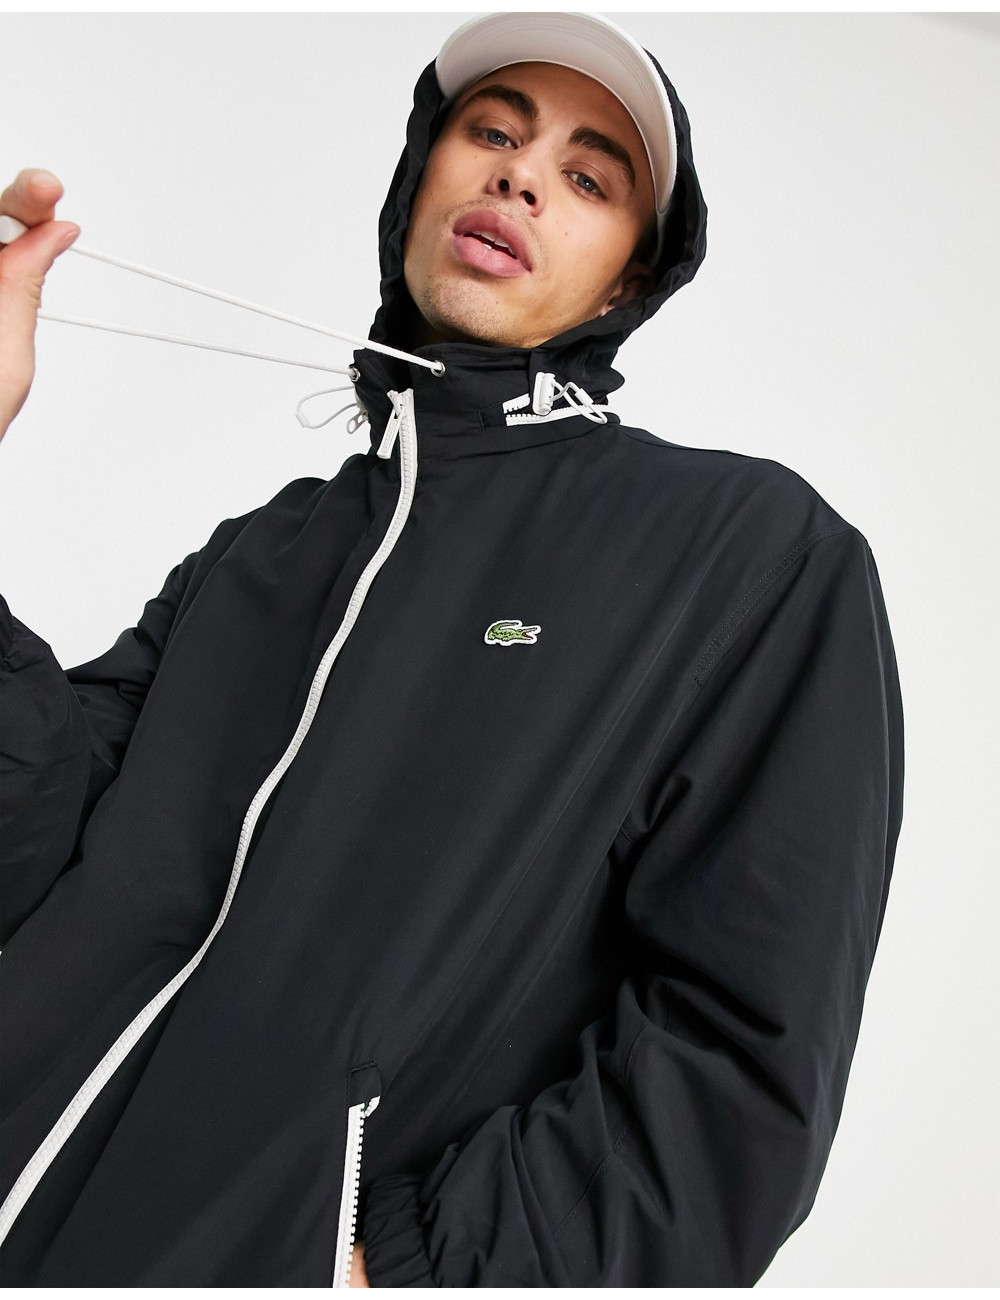 Lacoste classic jacket with...